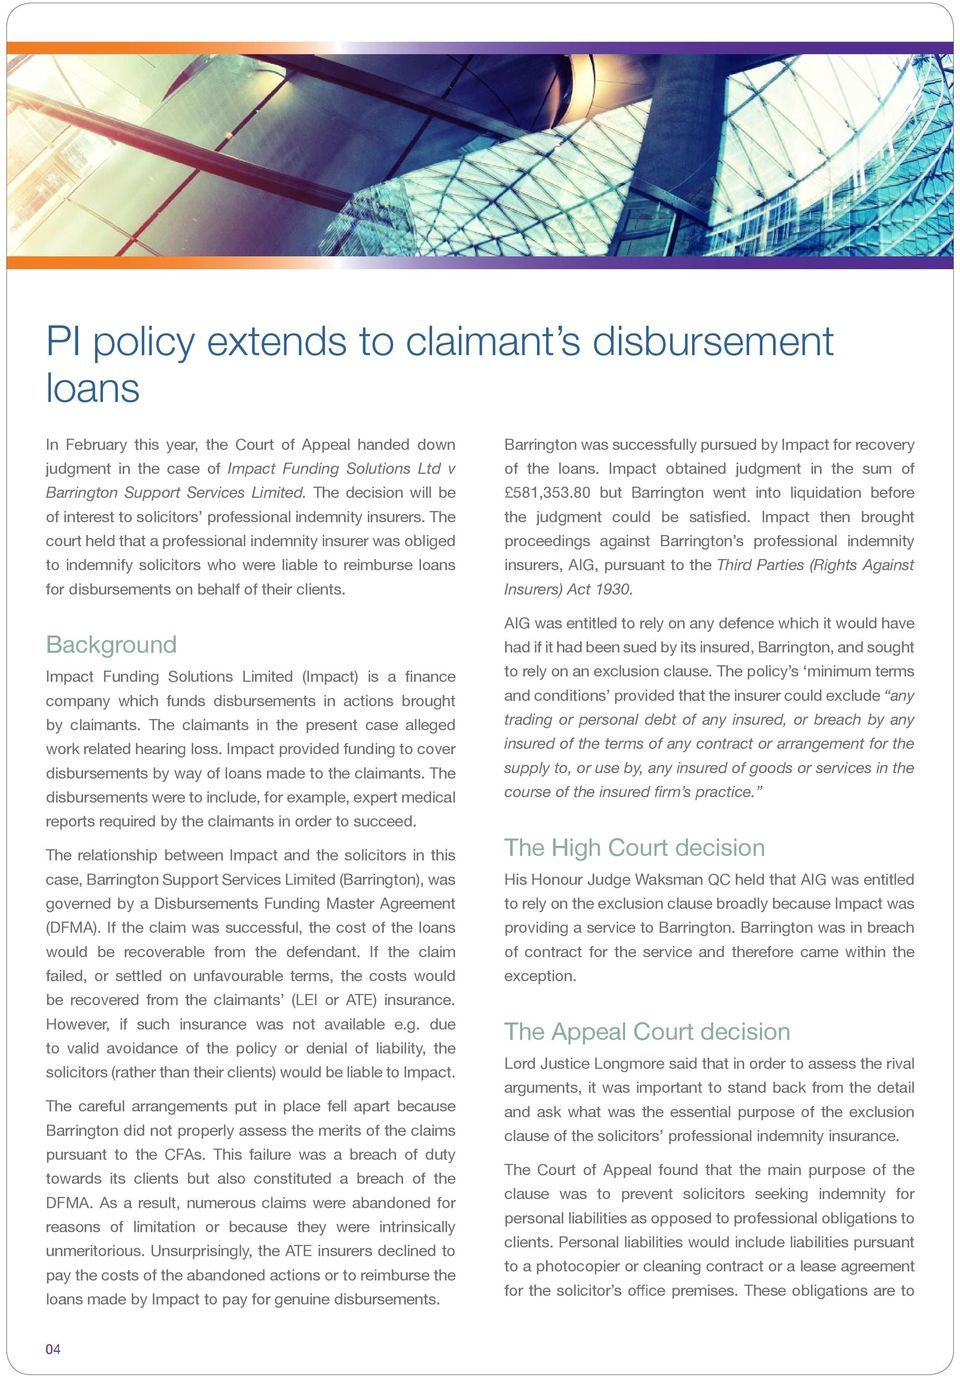 The court held that a professional indemnity insurer was obliged to indemnify solicitors who were liable to reimburse loans for disbursements on behalf of their clients.